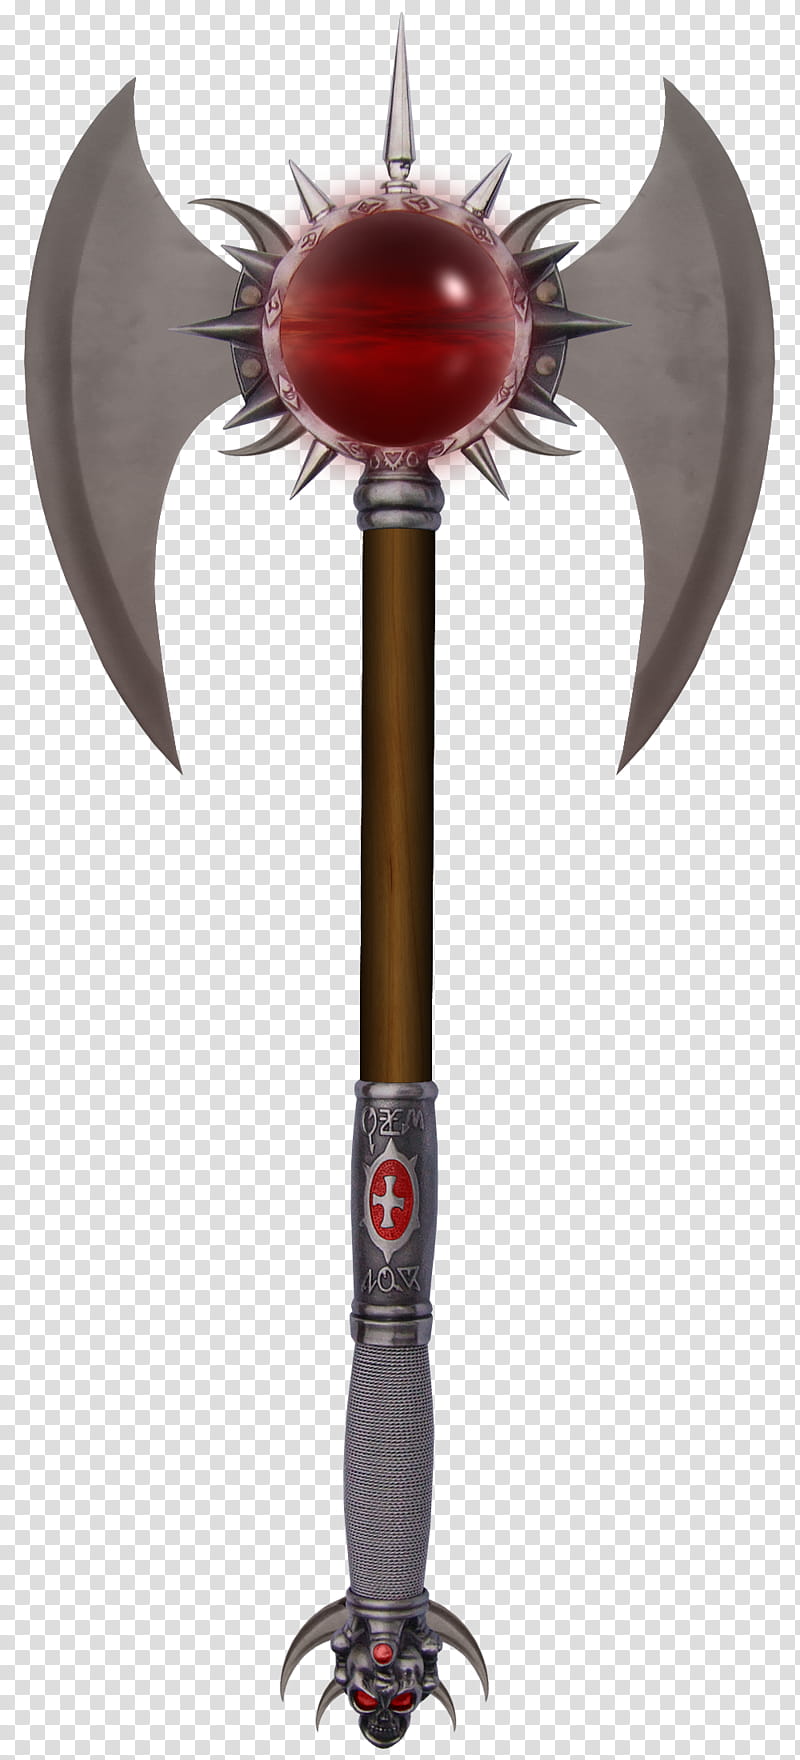 Funerium Weapon Red Axe, gray and brown battle ax transparent background PNG clipart